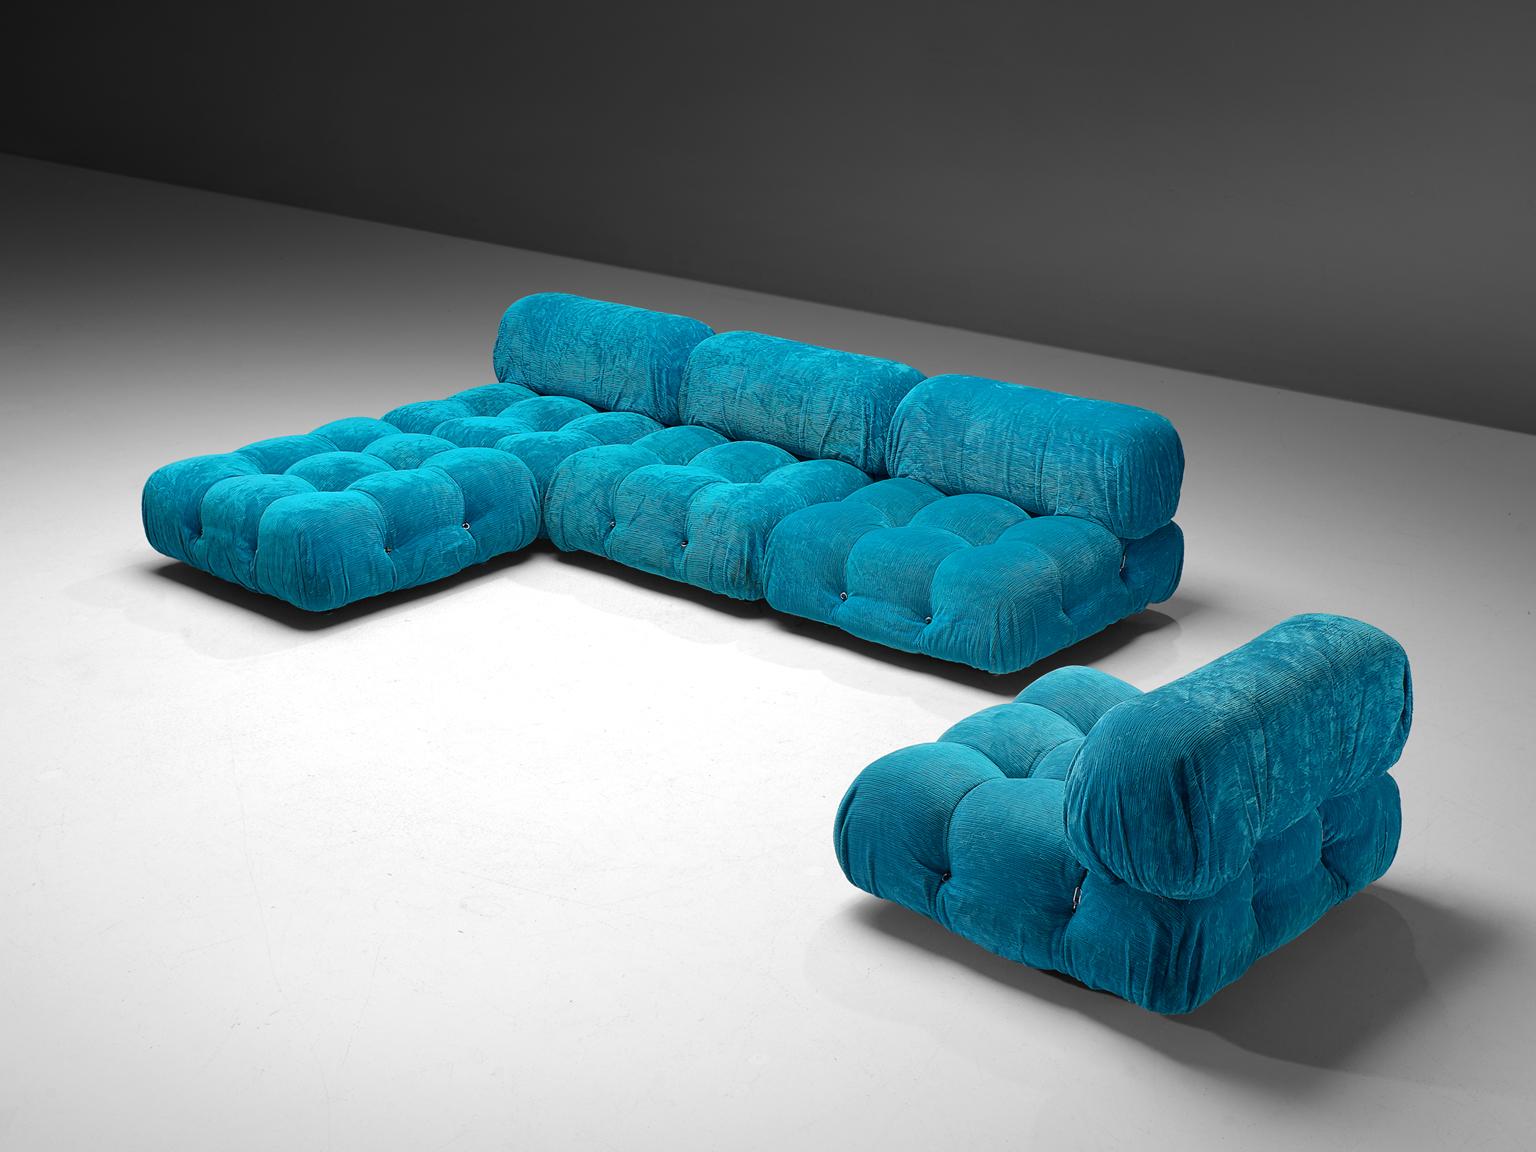 Mario Bellini, modular 'Cameleonda' sofa in light blue corduroy, Italy 1972.

The sectional elements of this sofa can be used freely and apart from one another. The upholstery on this piece features an original blue corduroy. The backs and armrests